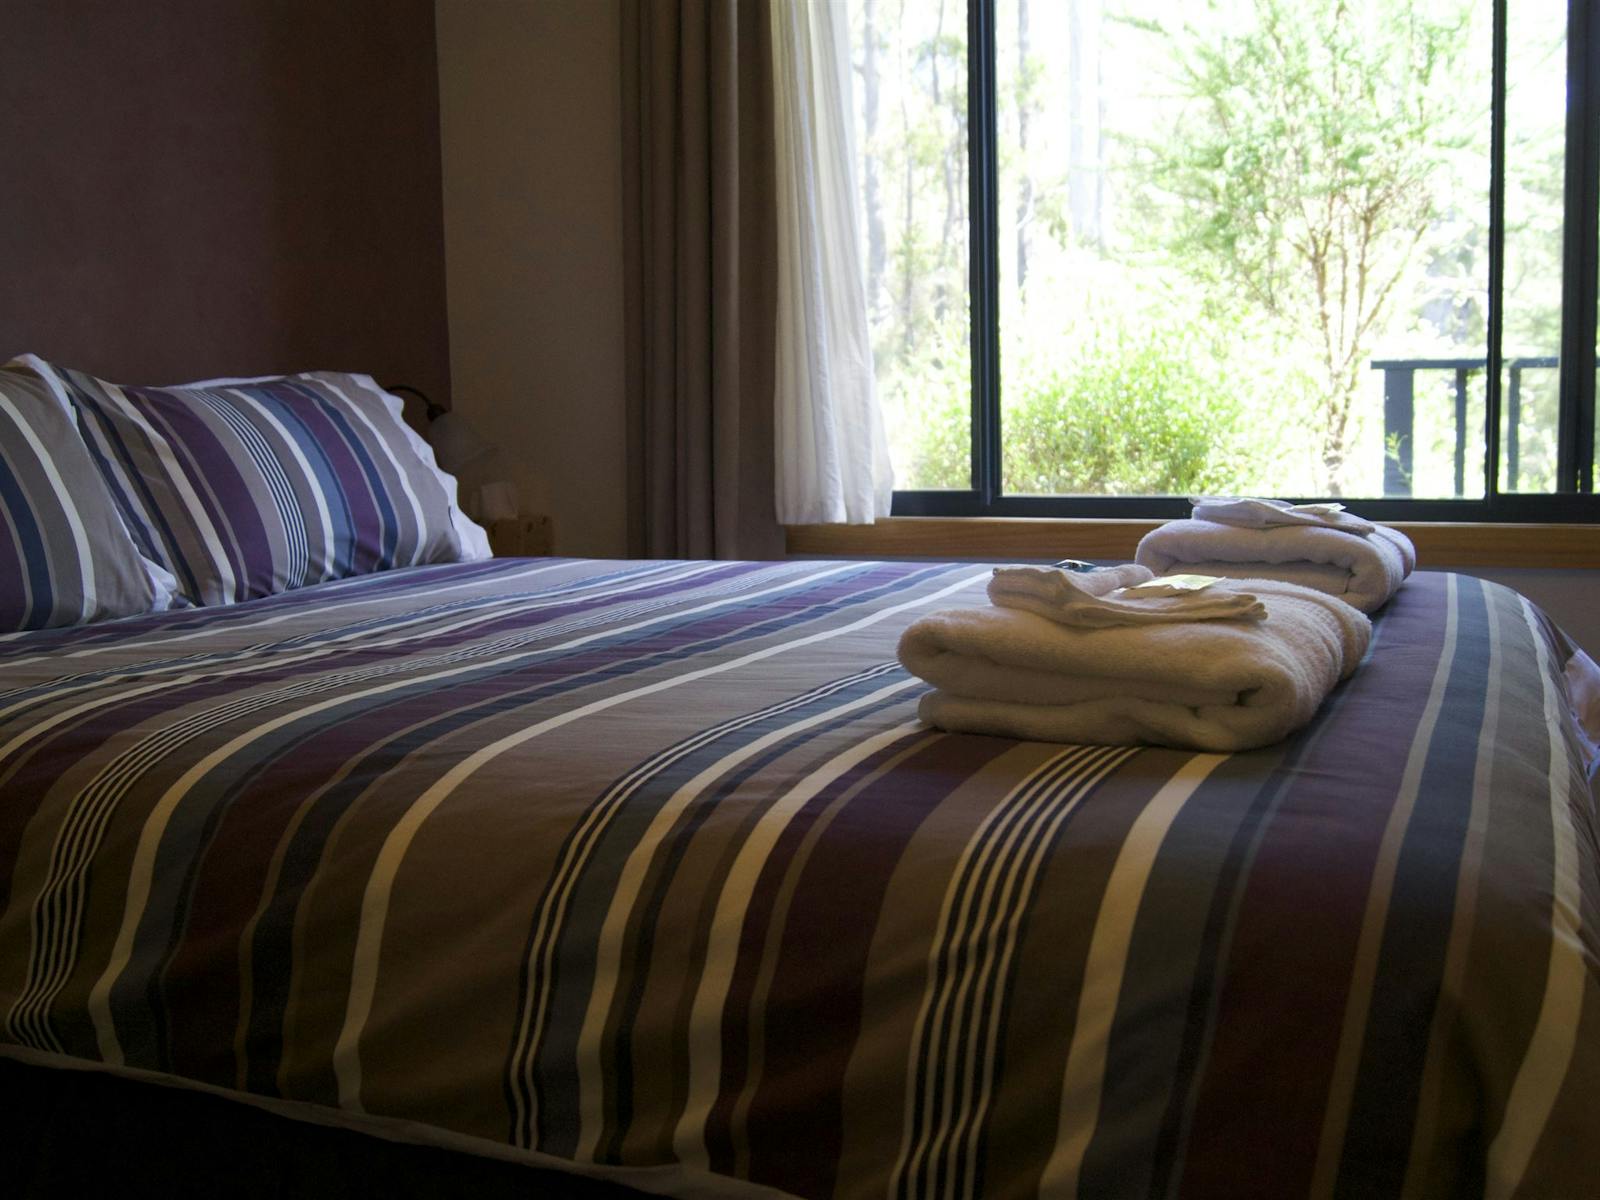 Queen-size bed in Nairana cottage.